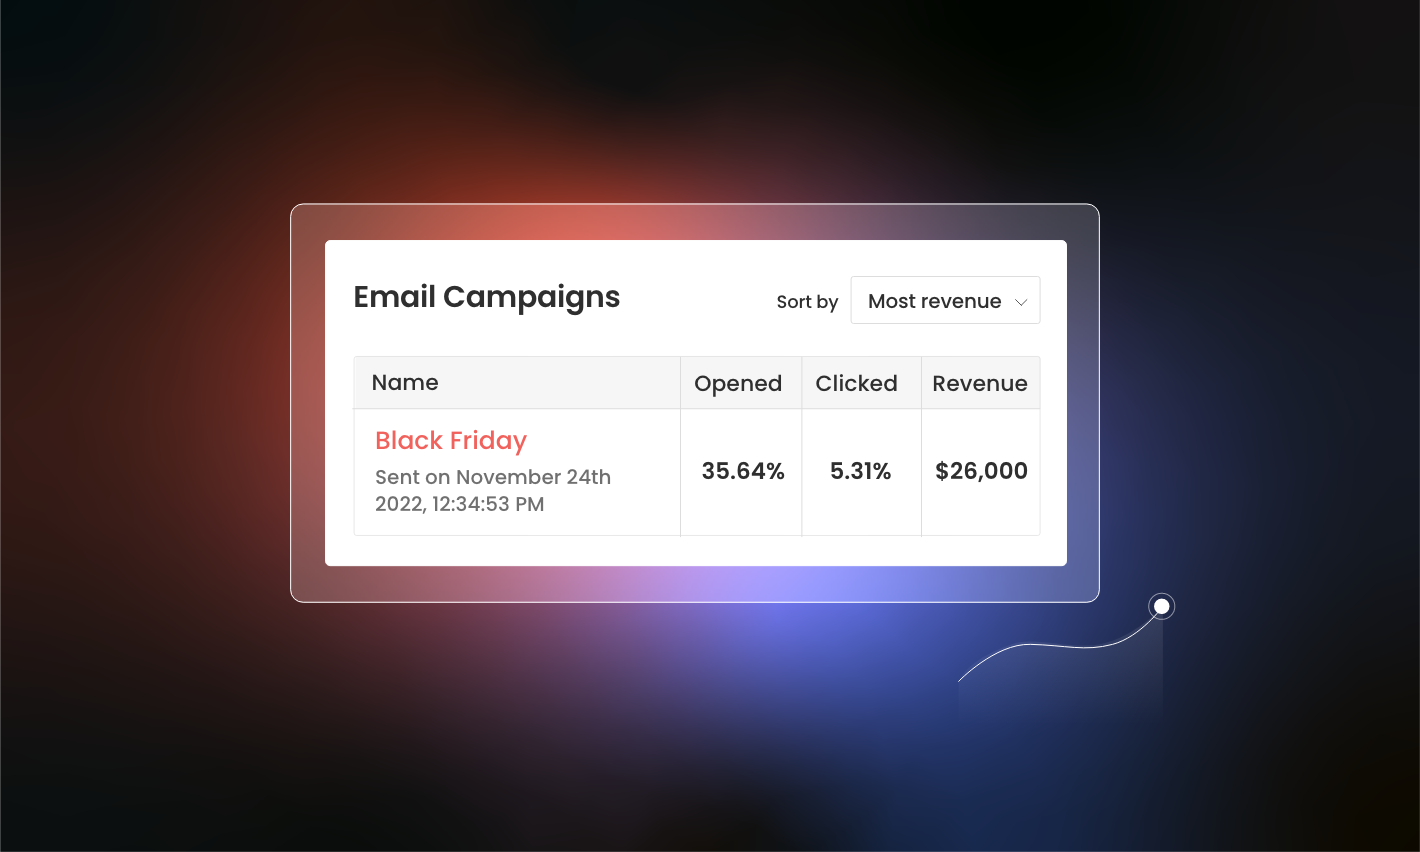 Black Friday email campaign